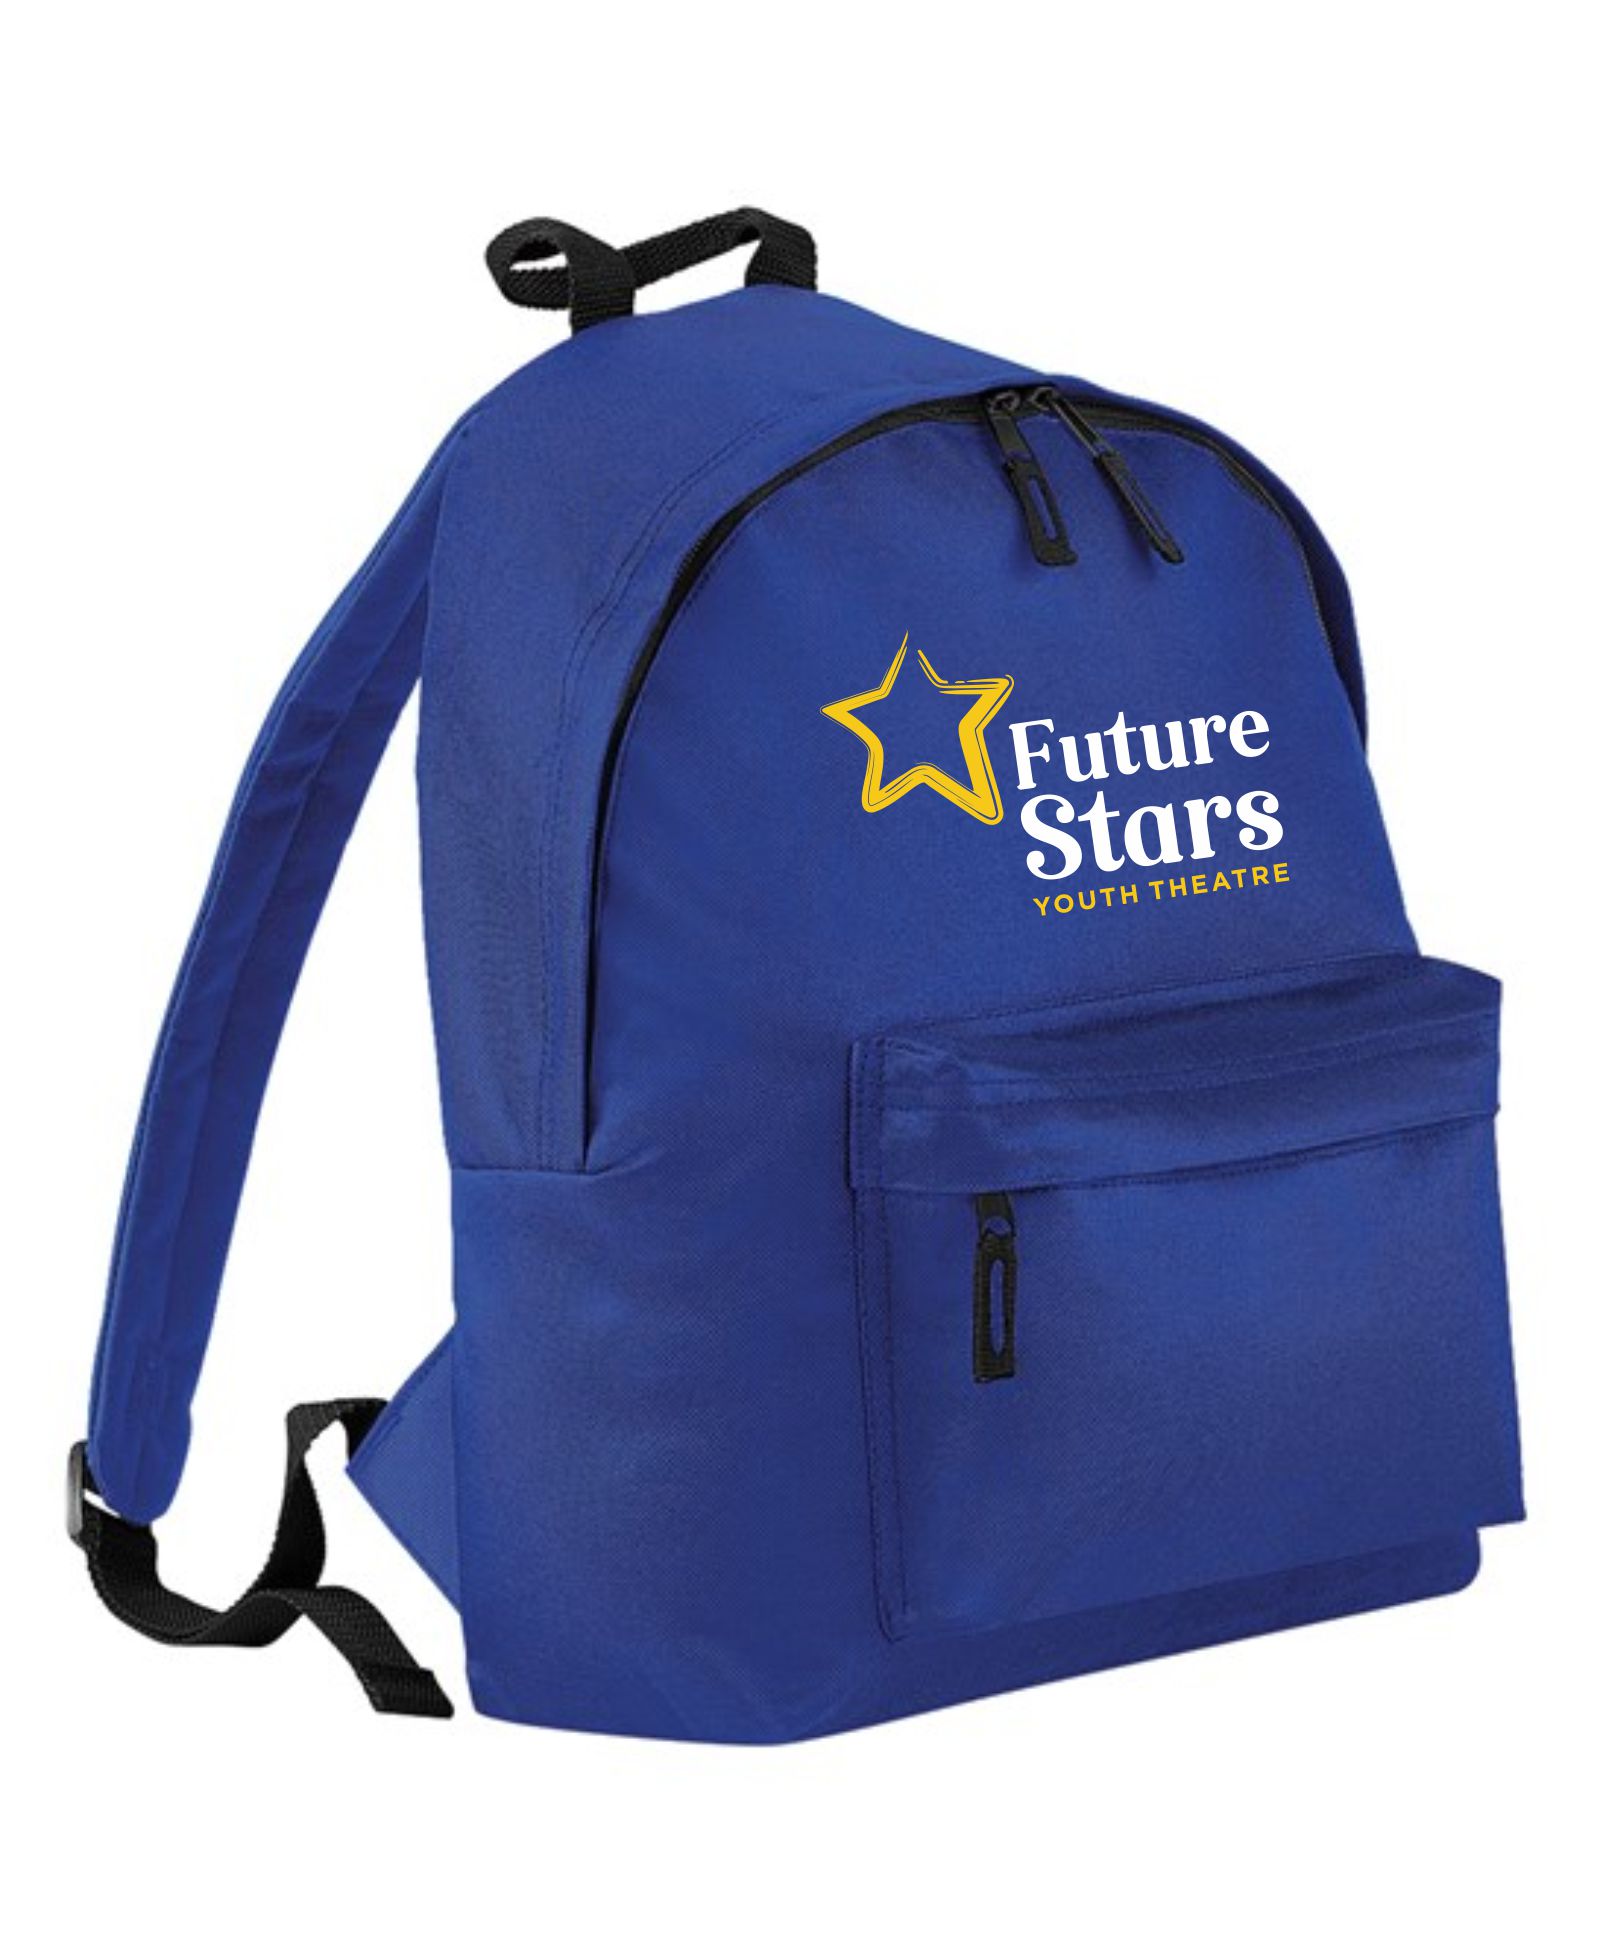 Future Stars Youth Theatre – Backpack (Juniors)